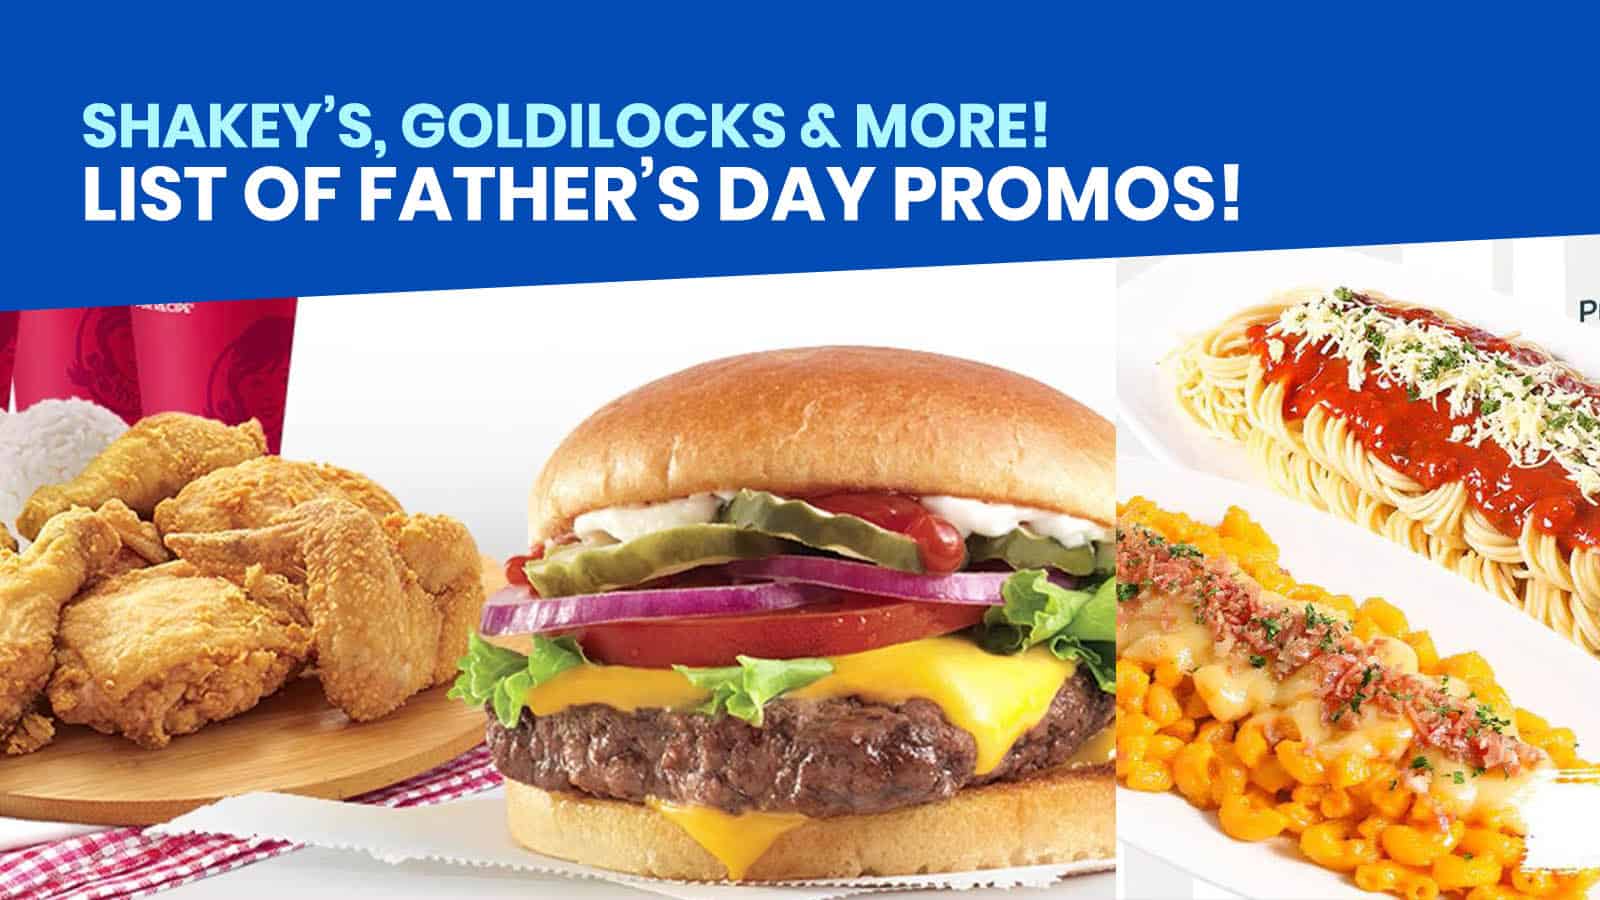 List of FATHER’S DAY Promos: Goldilocks, Shakey’s, Wendy’s & More!